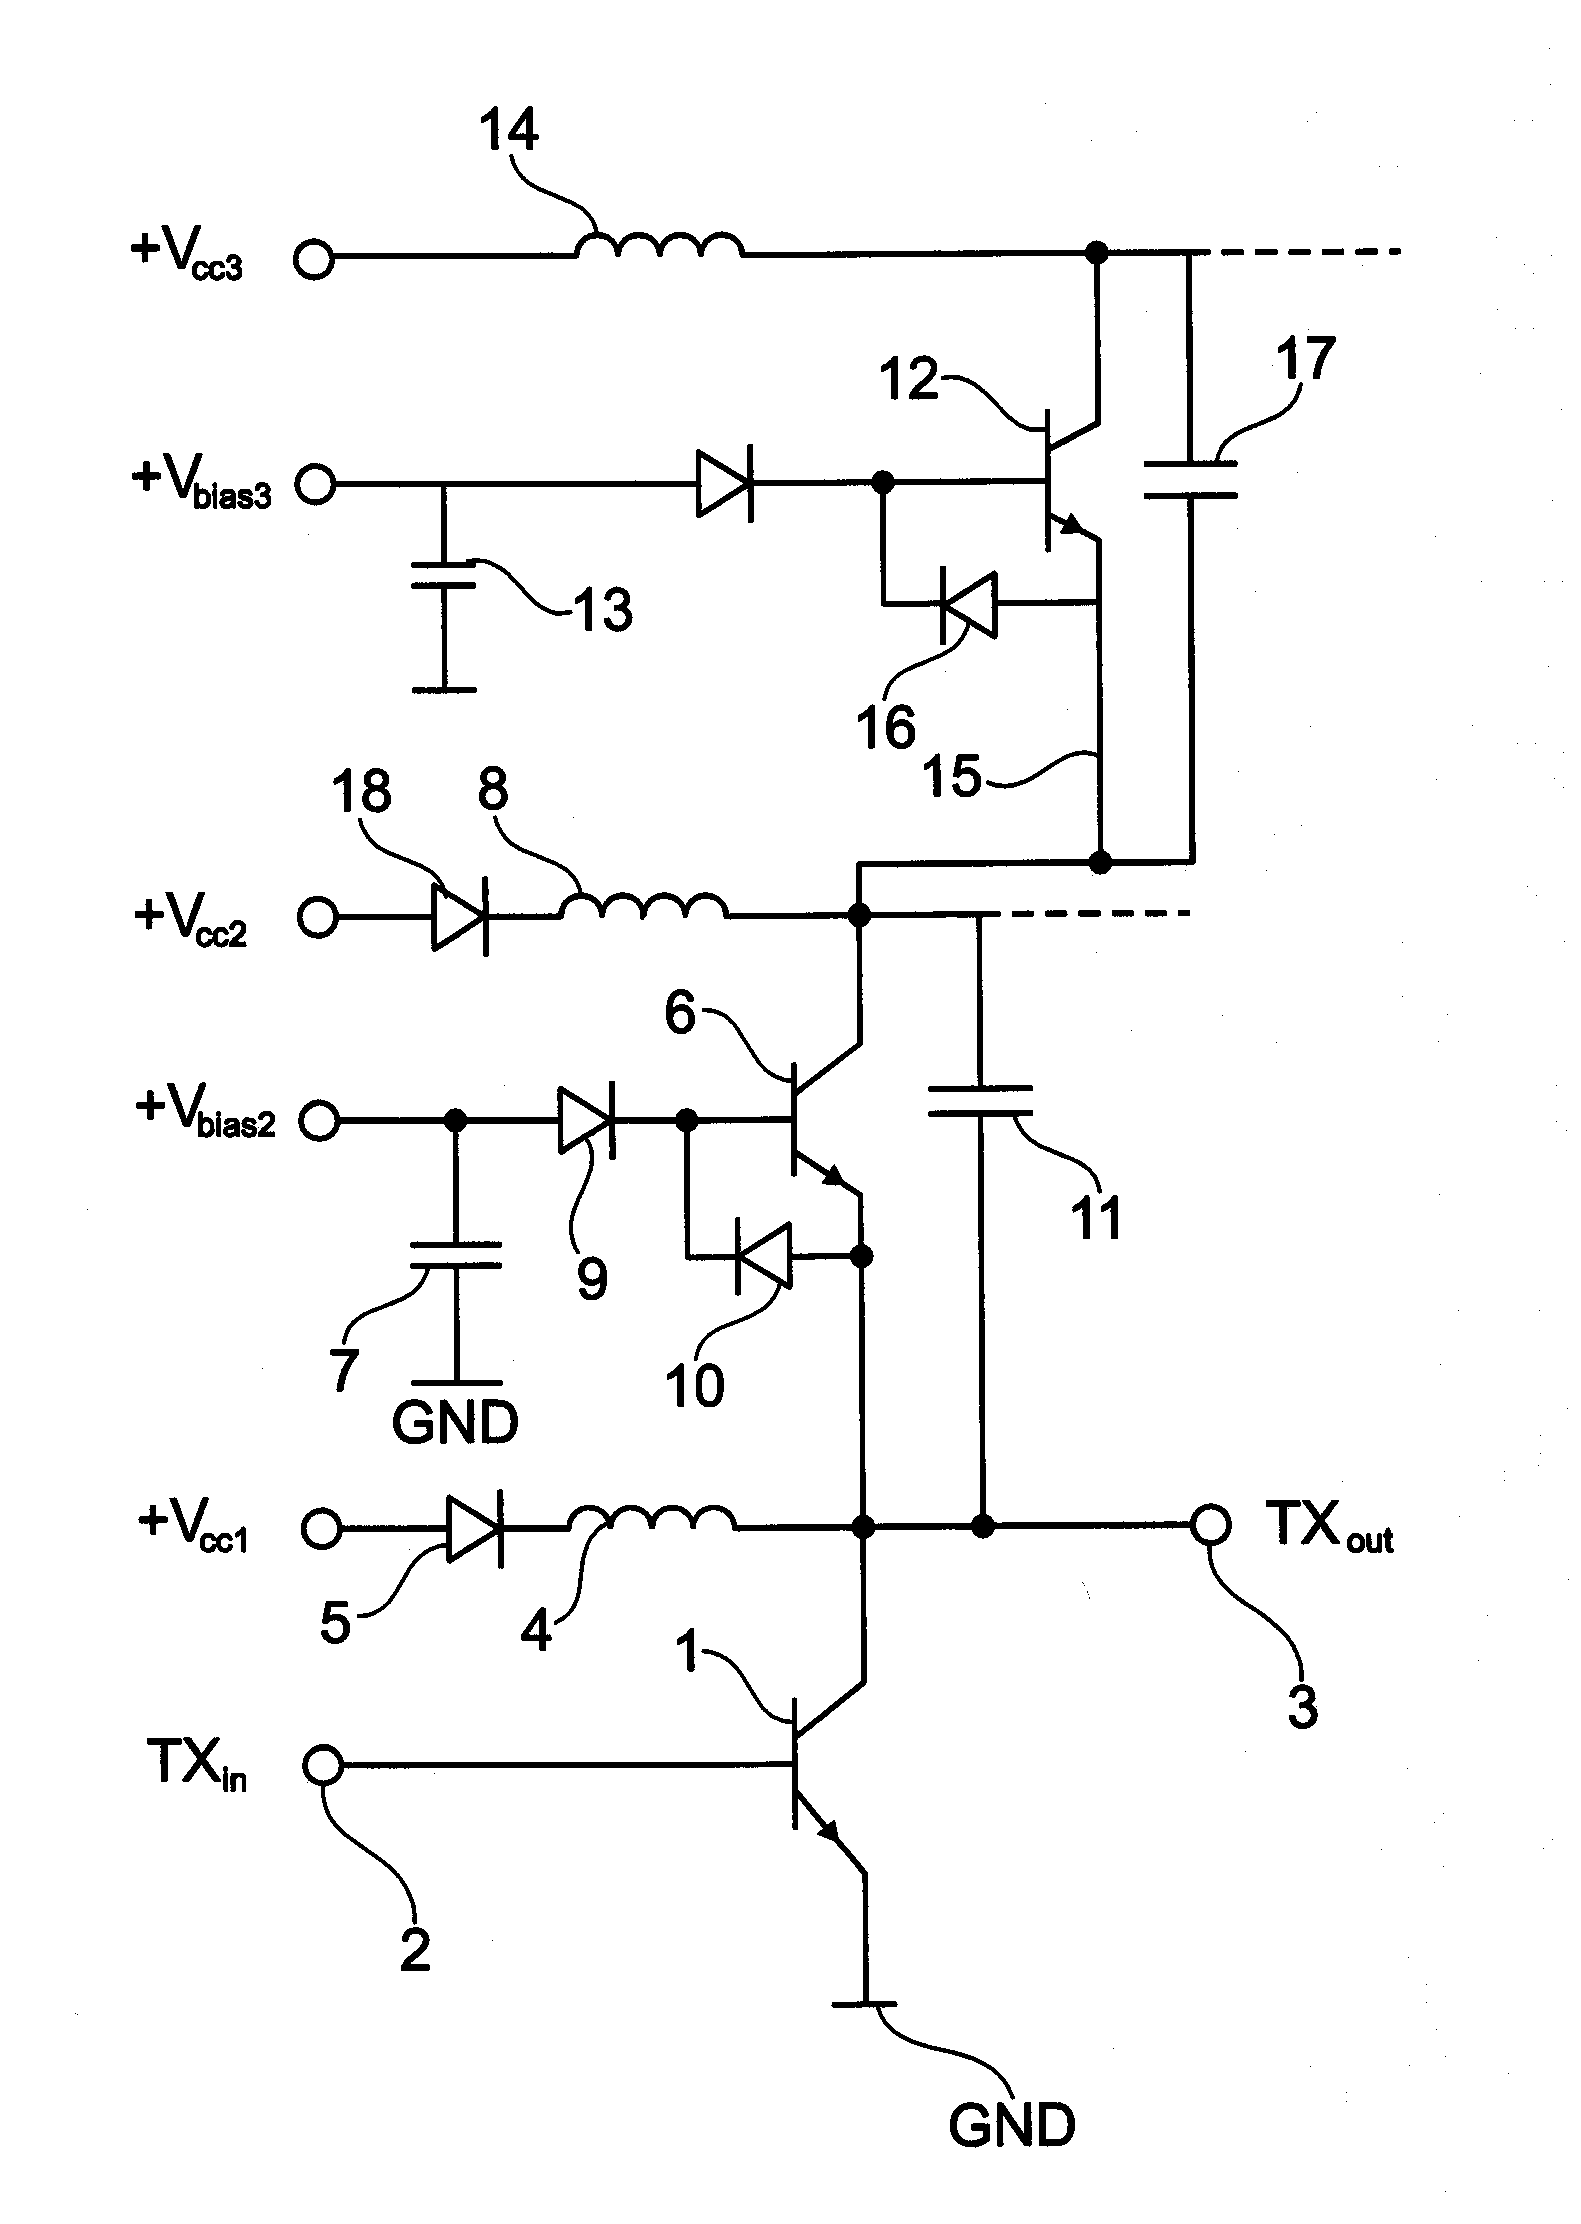 Power amplifier with dynamically added supply voltages